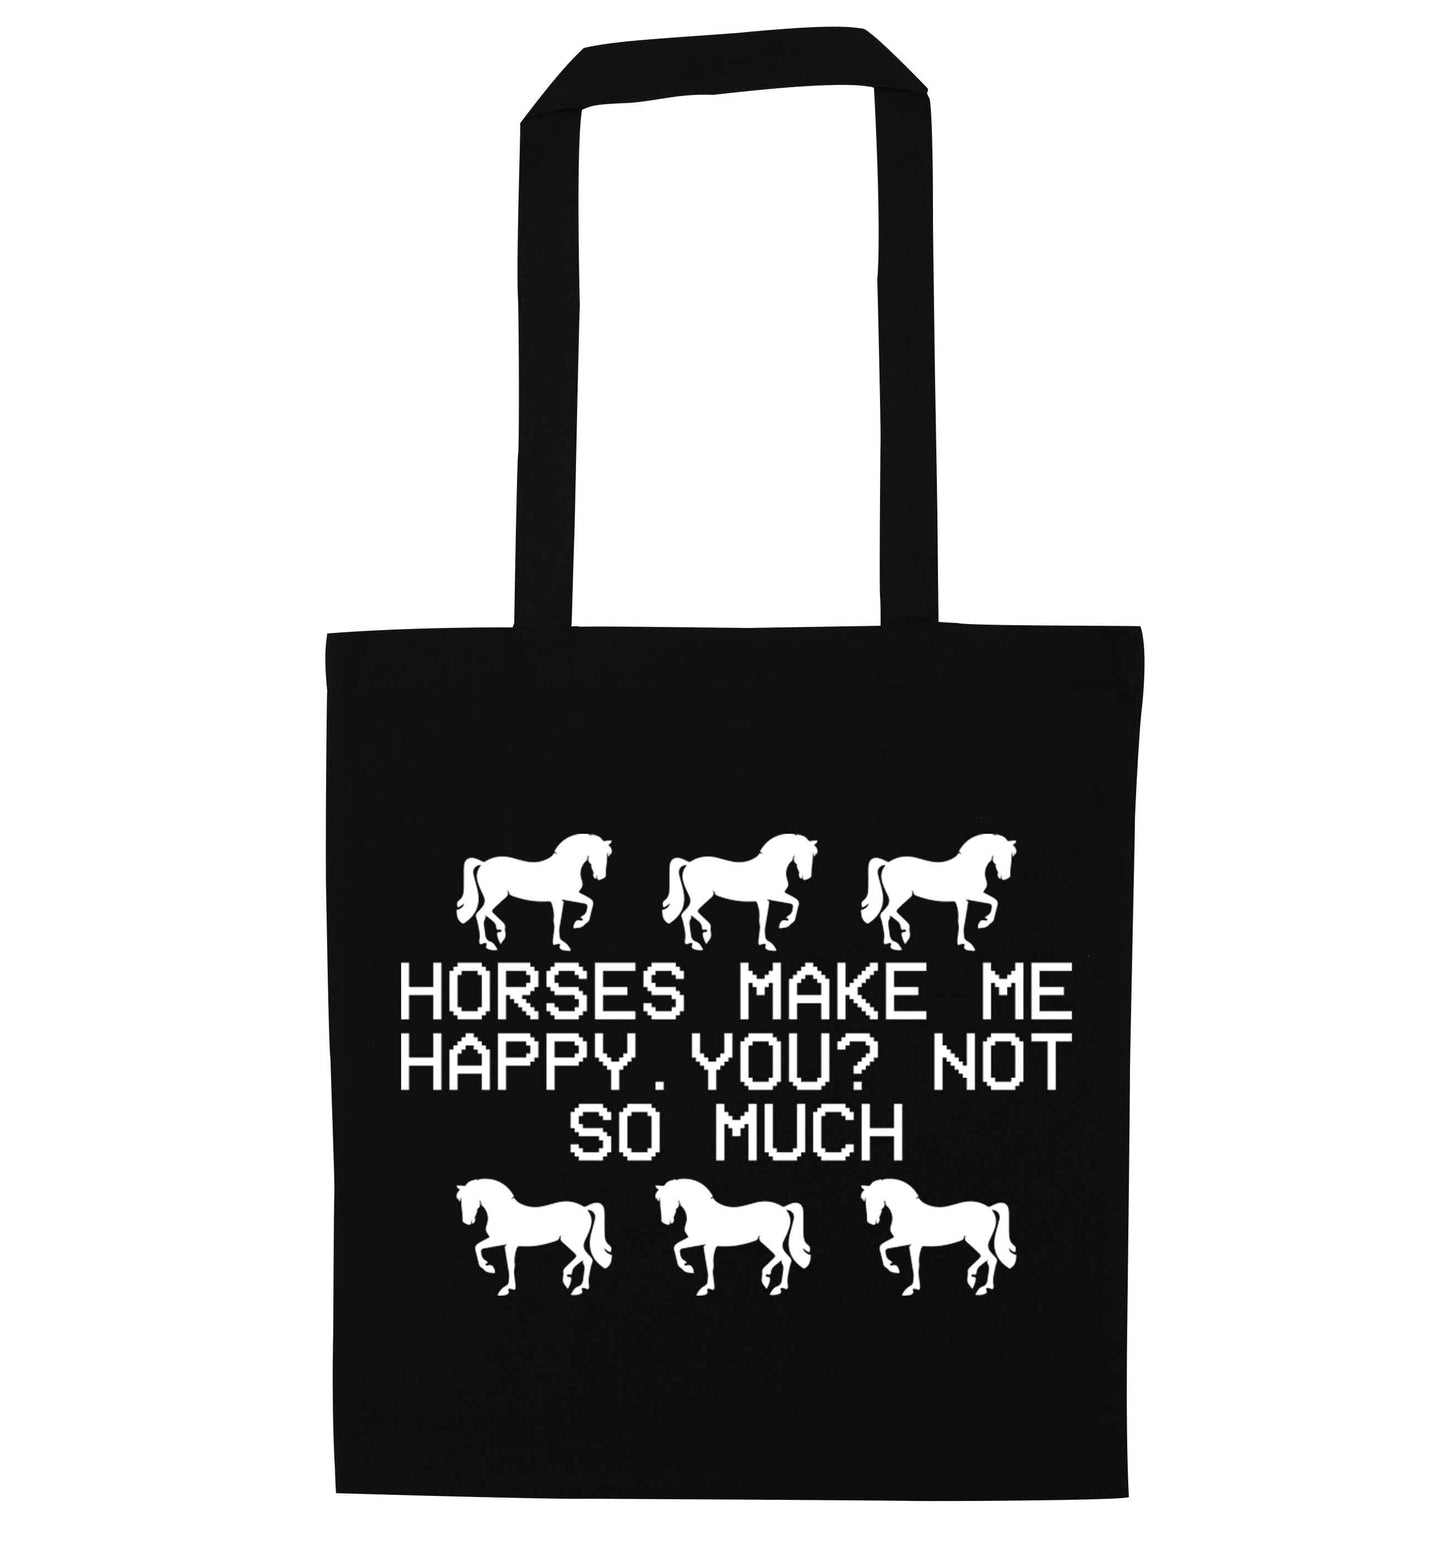 Horses make me happy, you not so much black tote bag